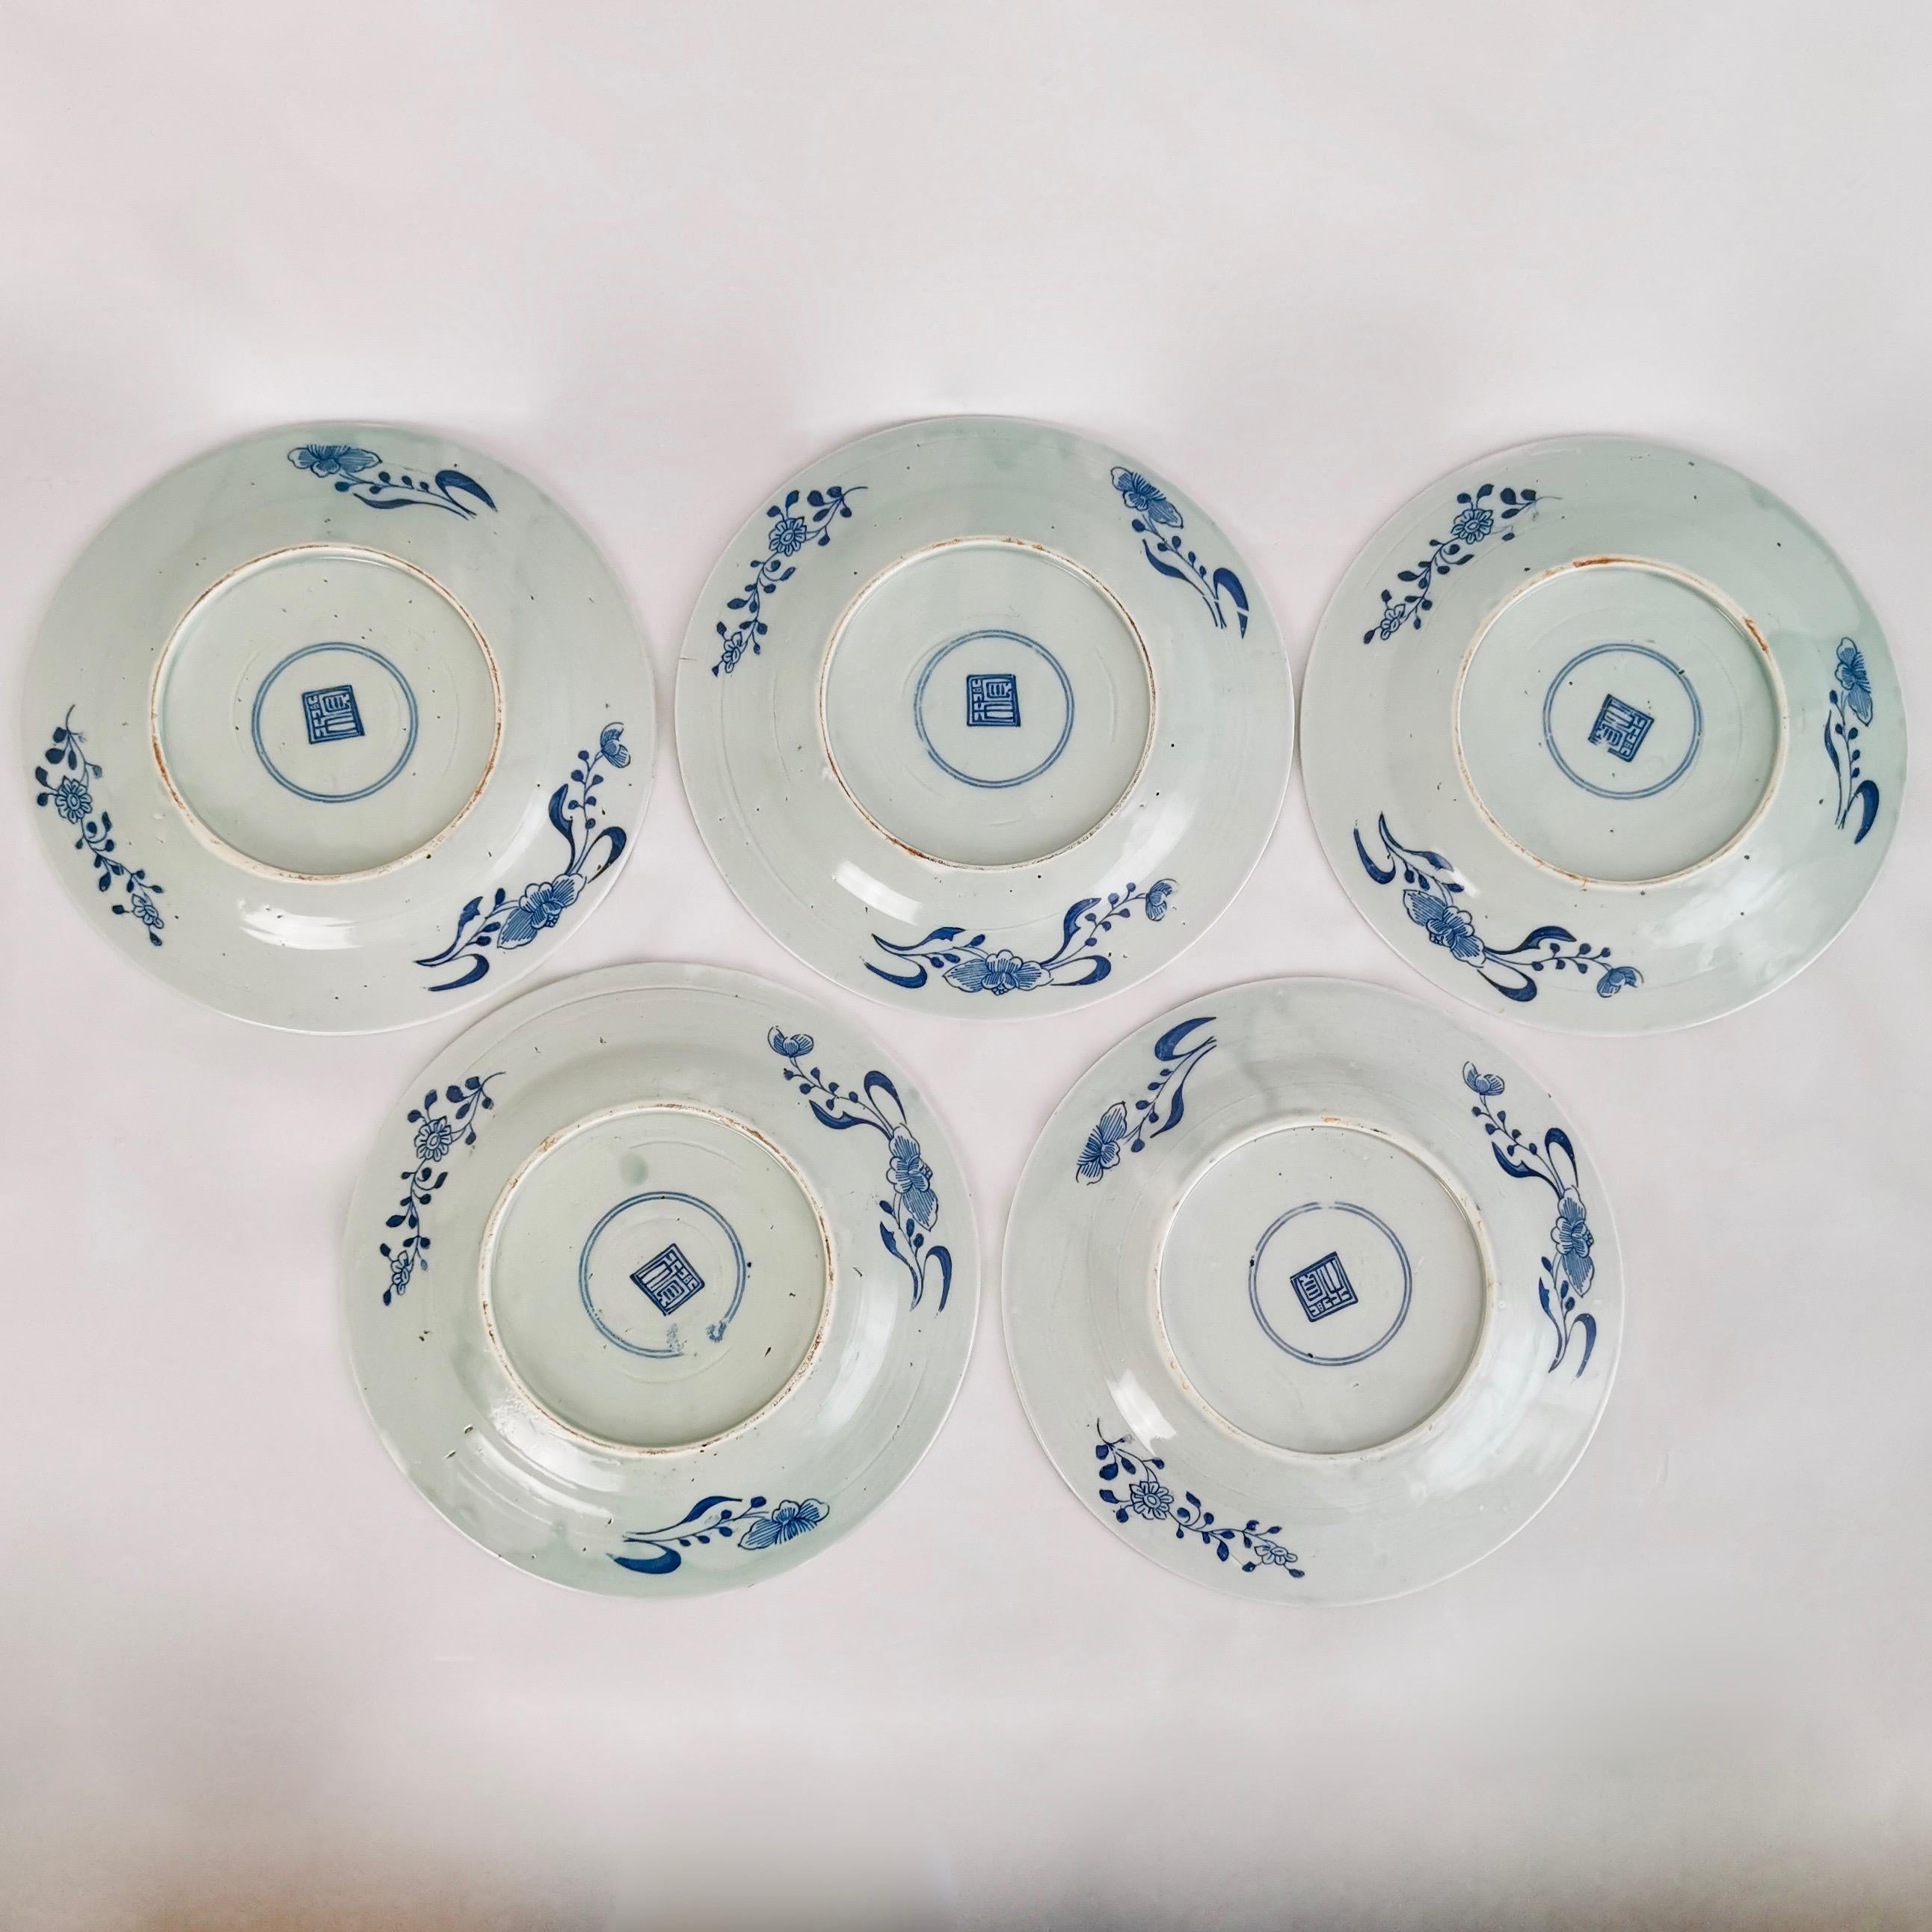 Set of 5 Chinese Export Plates, Blue and White, Boy with Butterfly, 19th Century 11